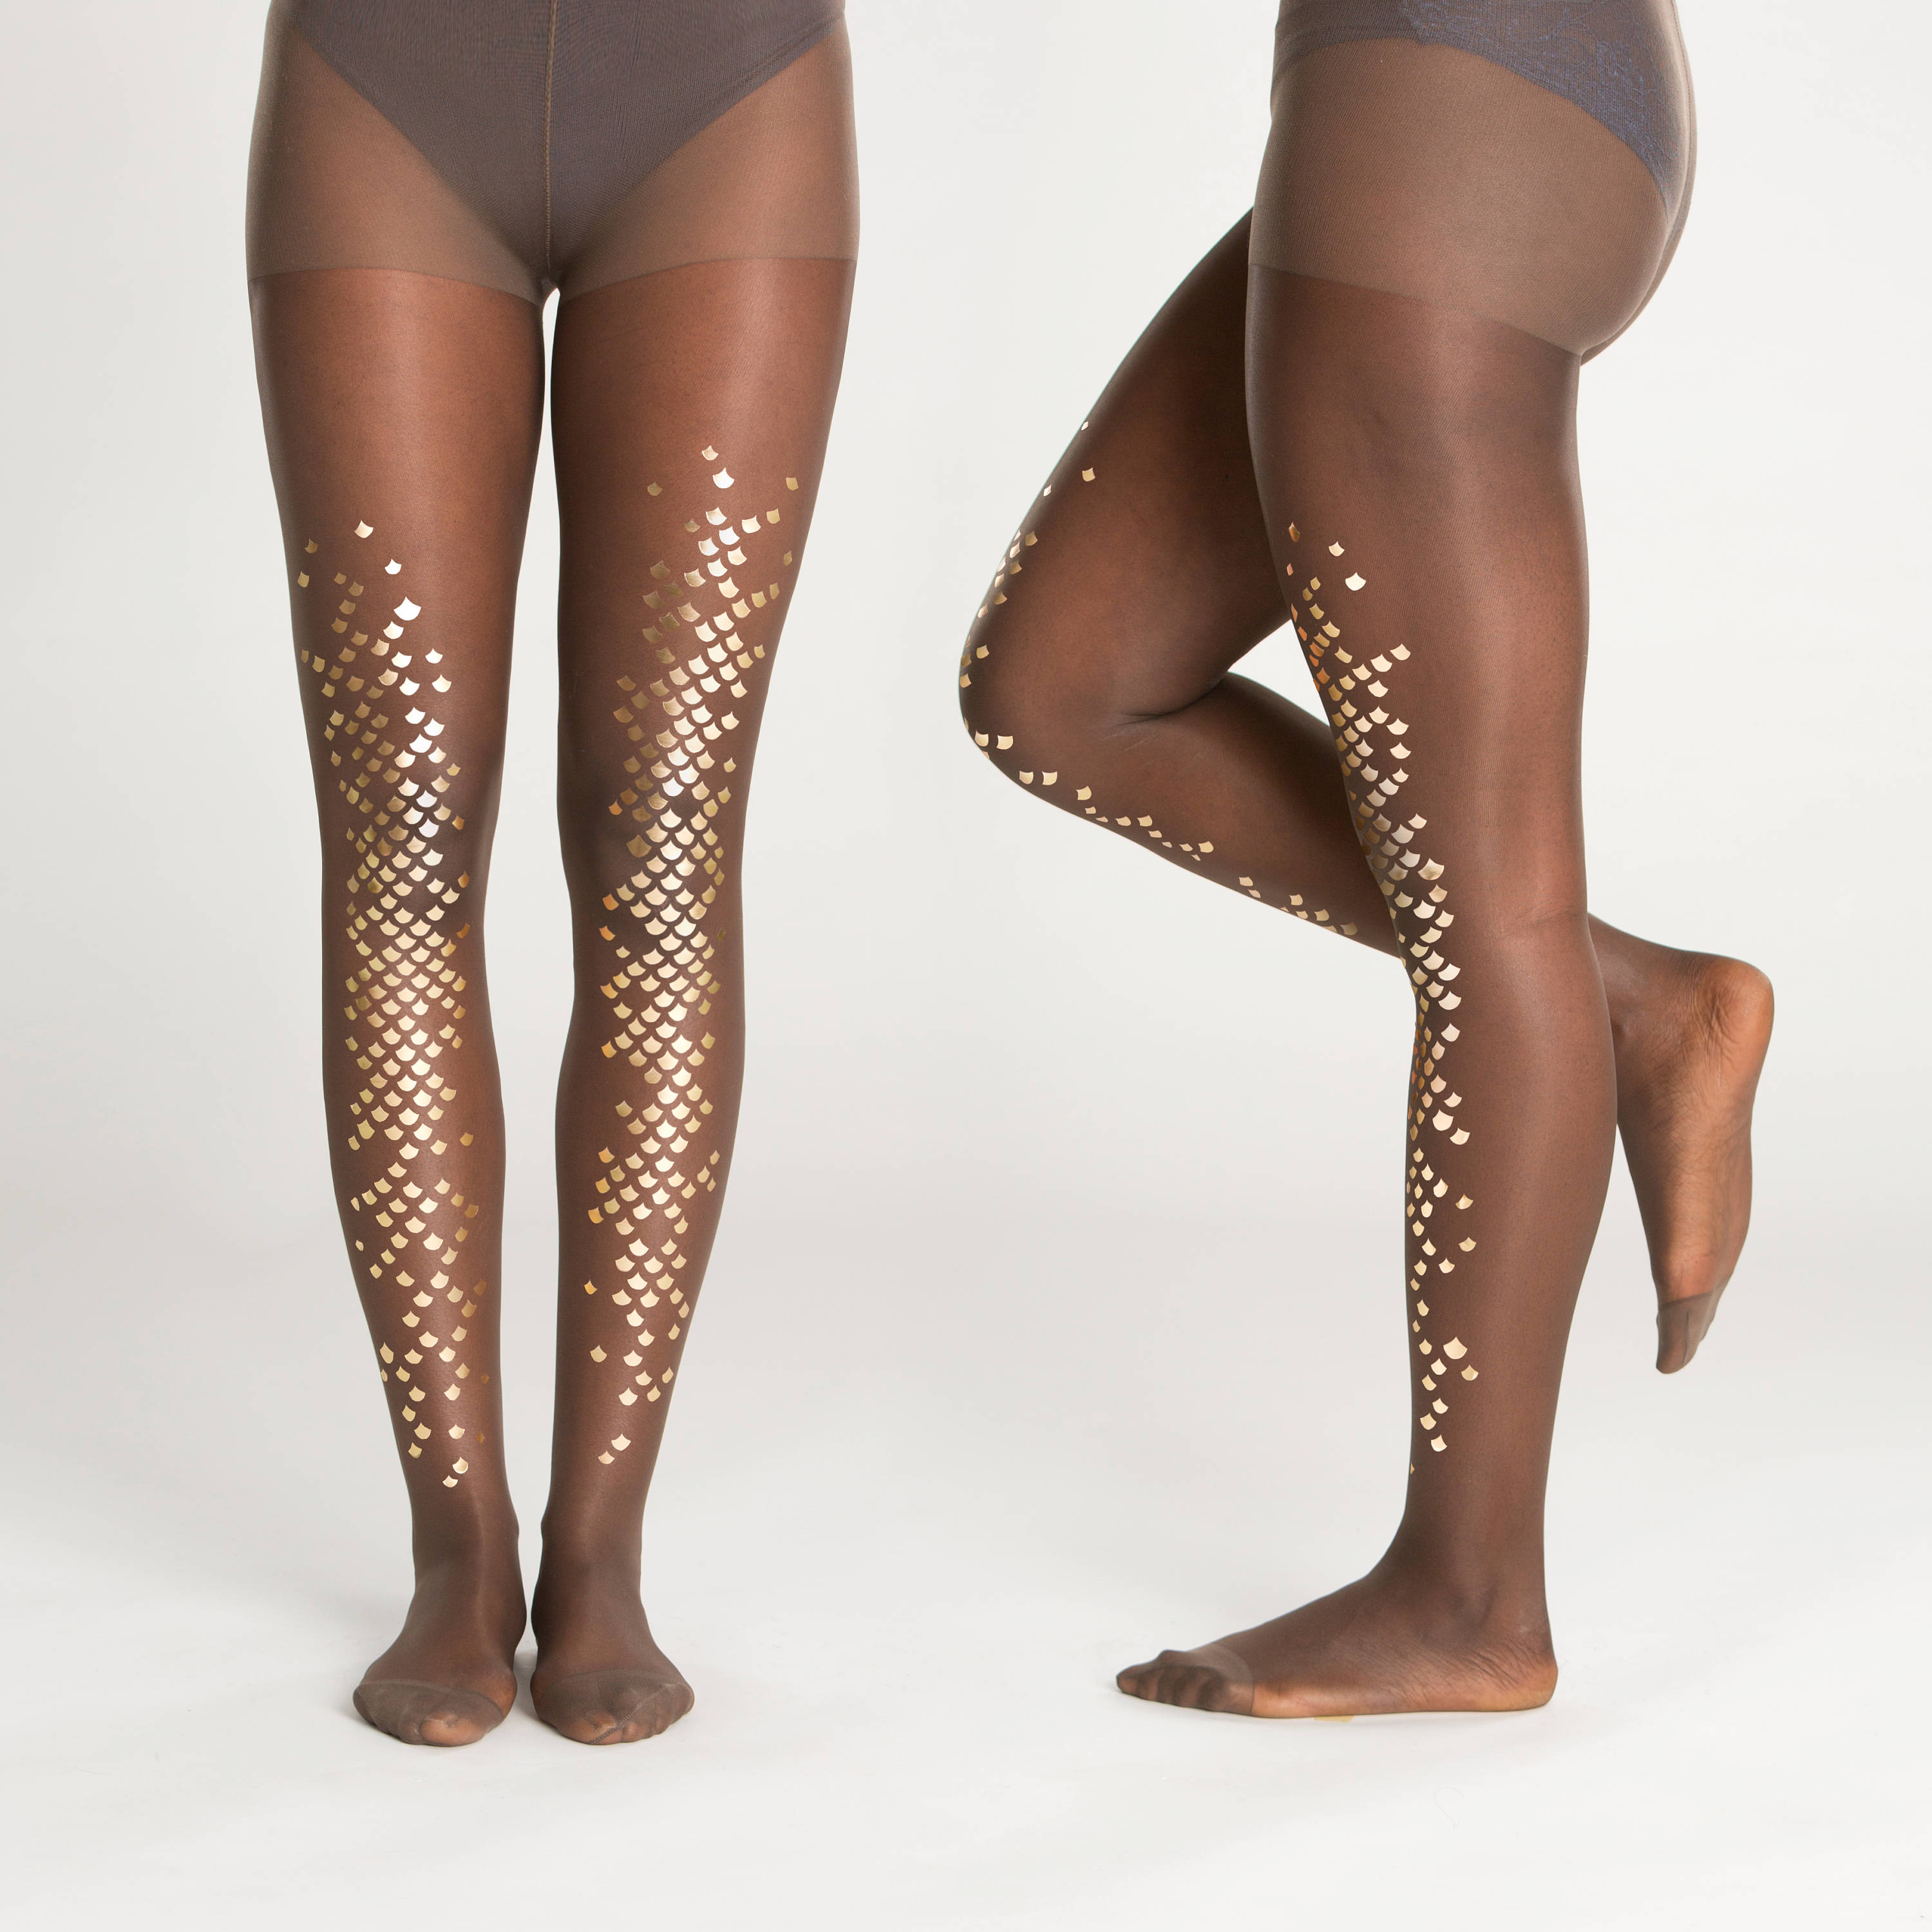 Mermaid Tights for Darker Skin, Gold Mermaid Scale Tights for